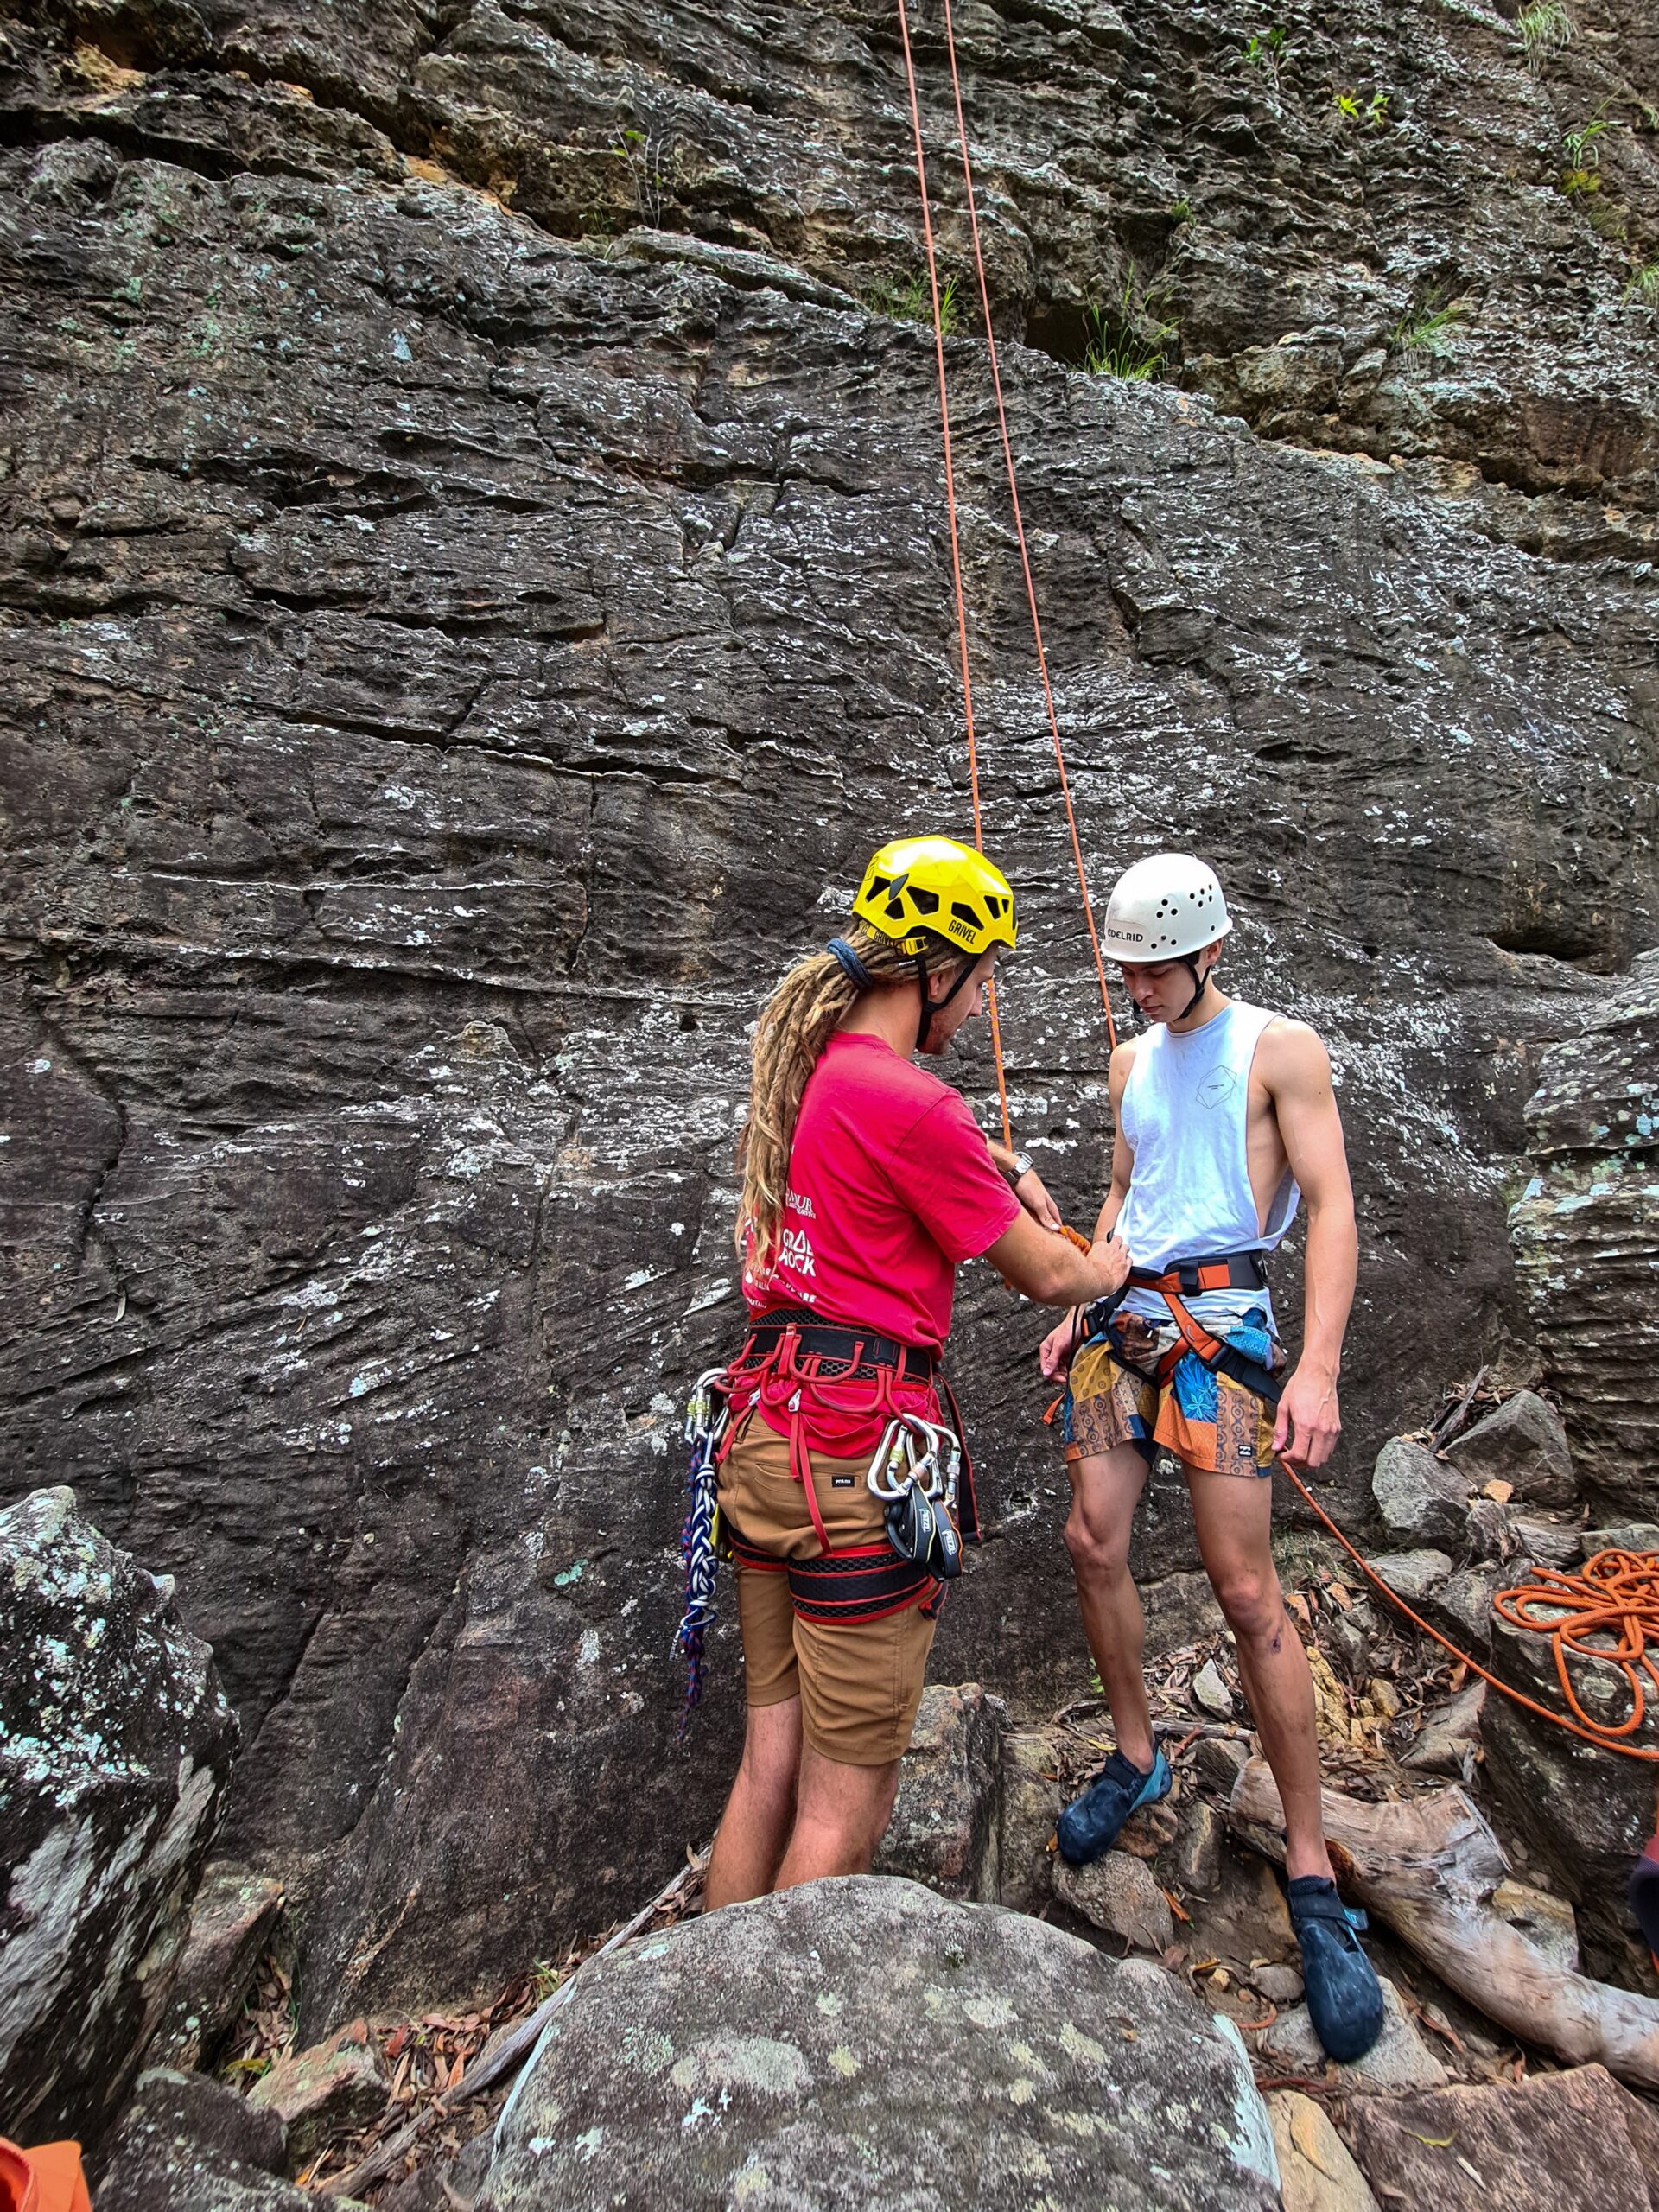 Safety check of the harness at the bottom of the rock face